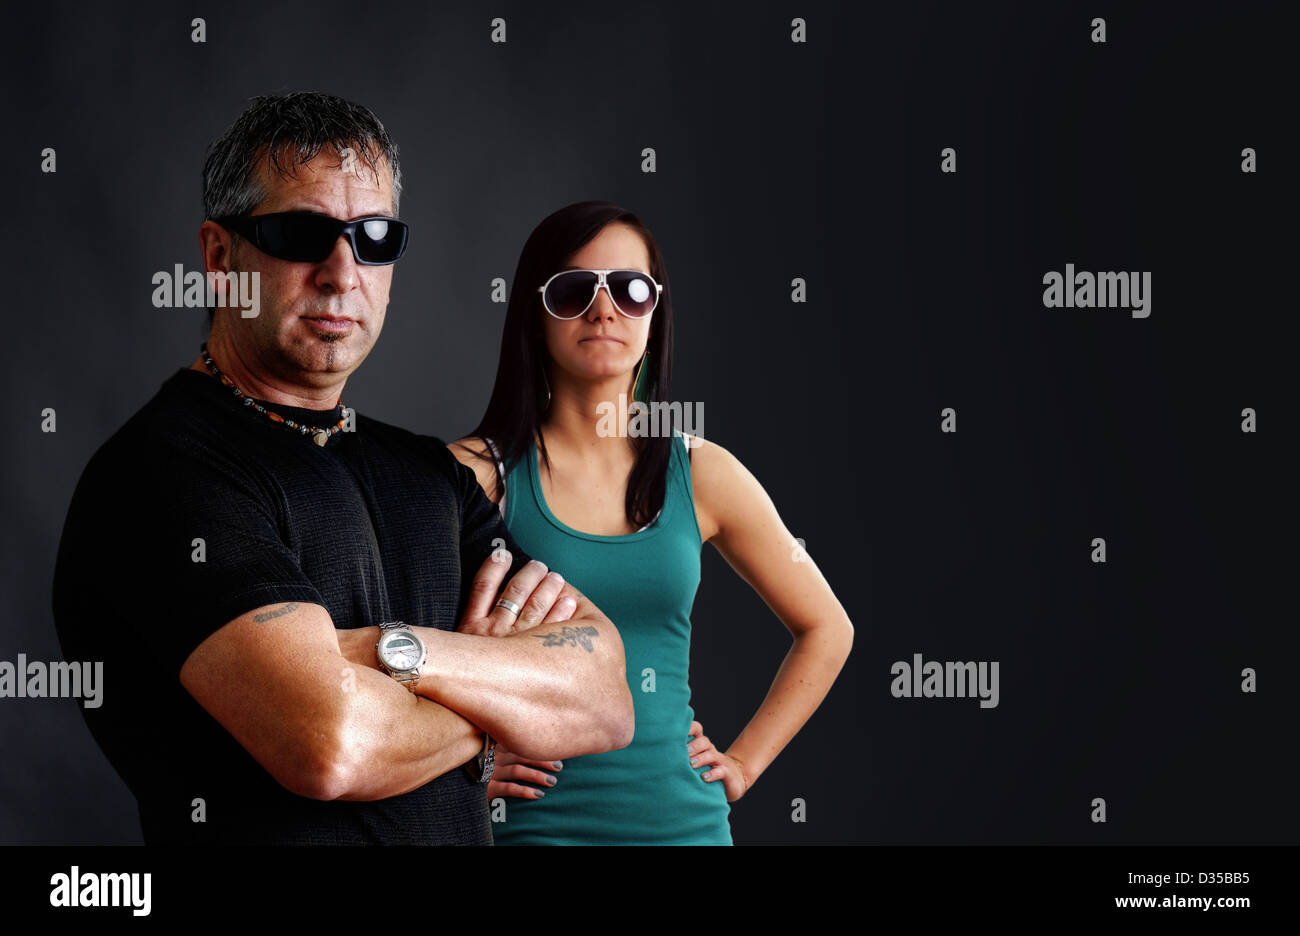 Tough guy with young biker chick Stock Photo